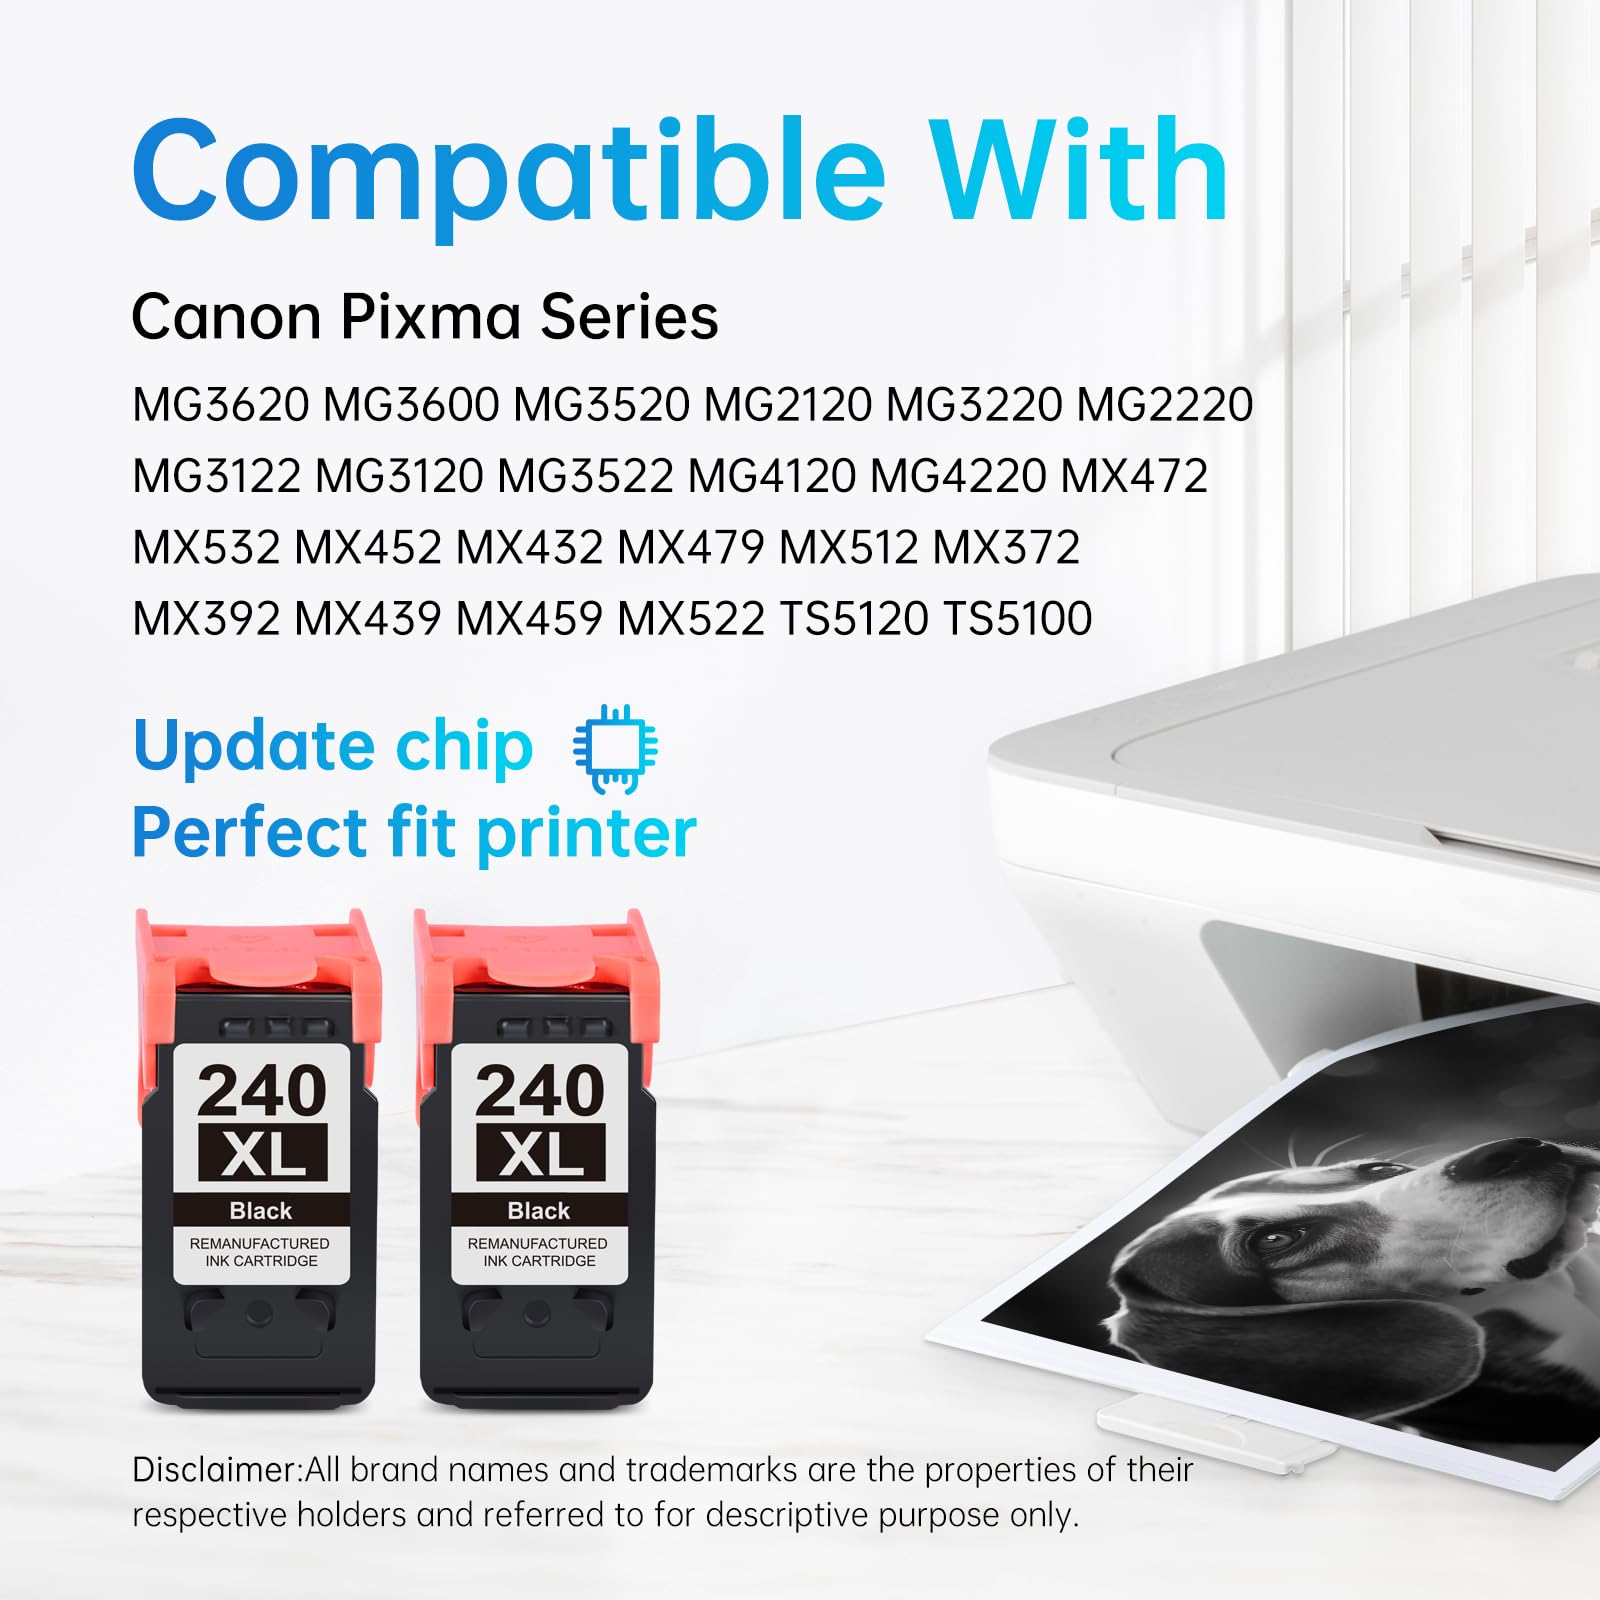 Compatible With Canon Pixma Series" Printers for LEMERO 240XL Ink Cartridges:Detailed compatibility list of LEMERO 240XL ink cartridges with various Canon PIXMA printer models, featuring updated chip technology for a perfect printer fit.